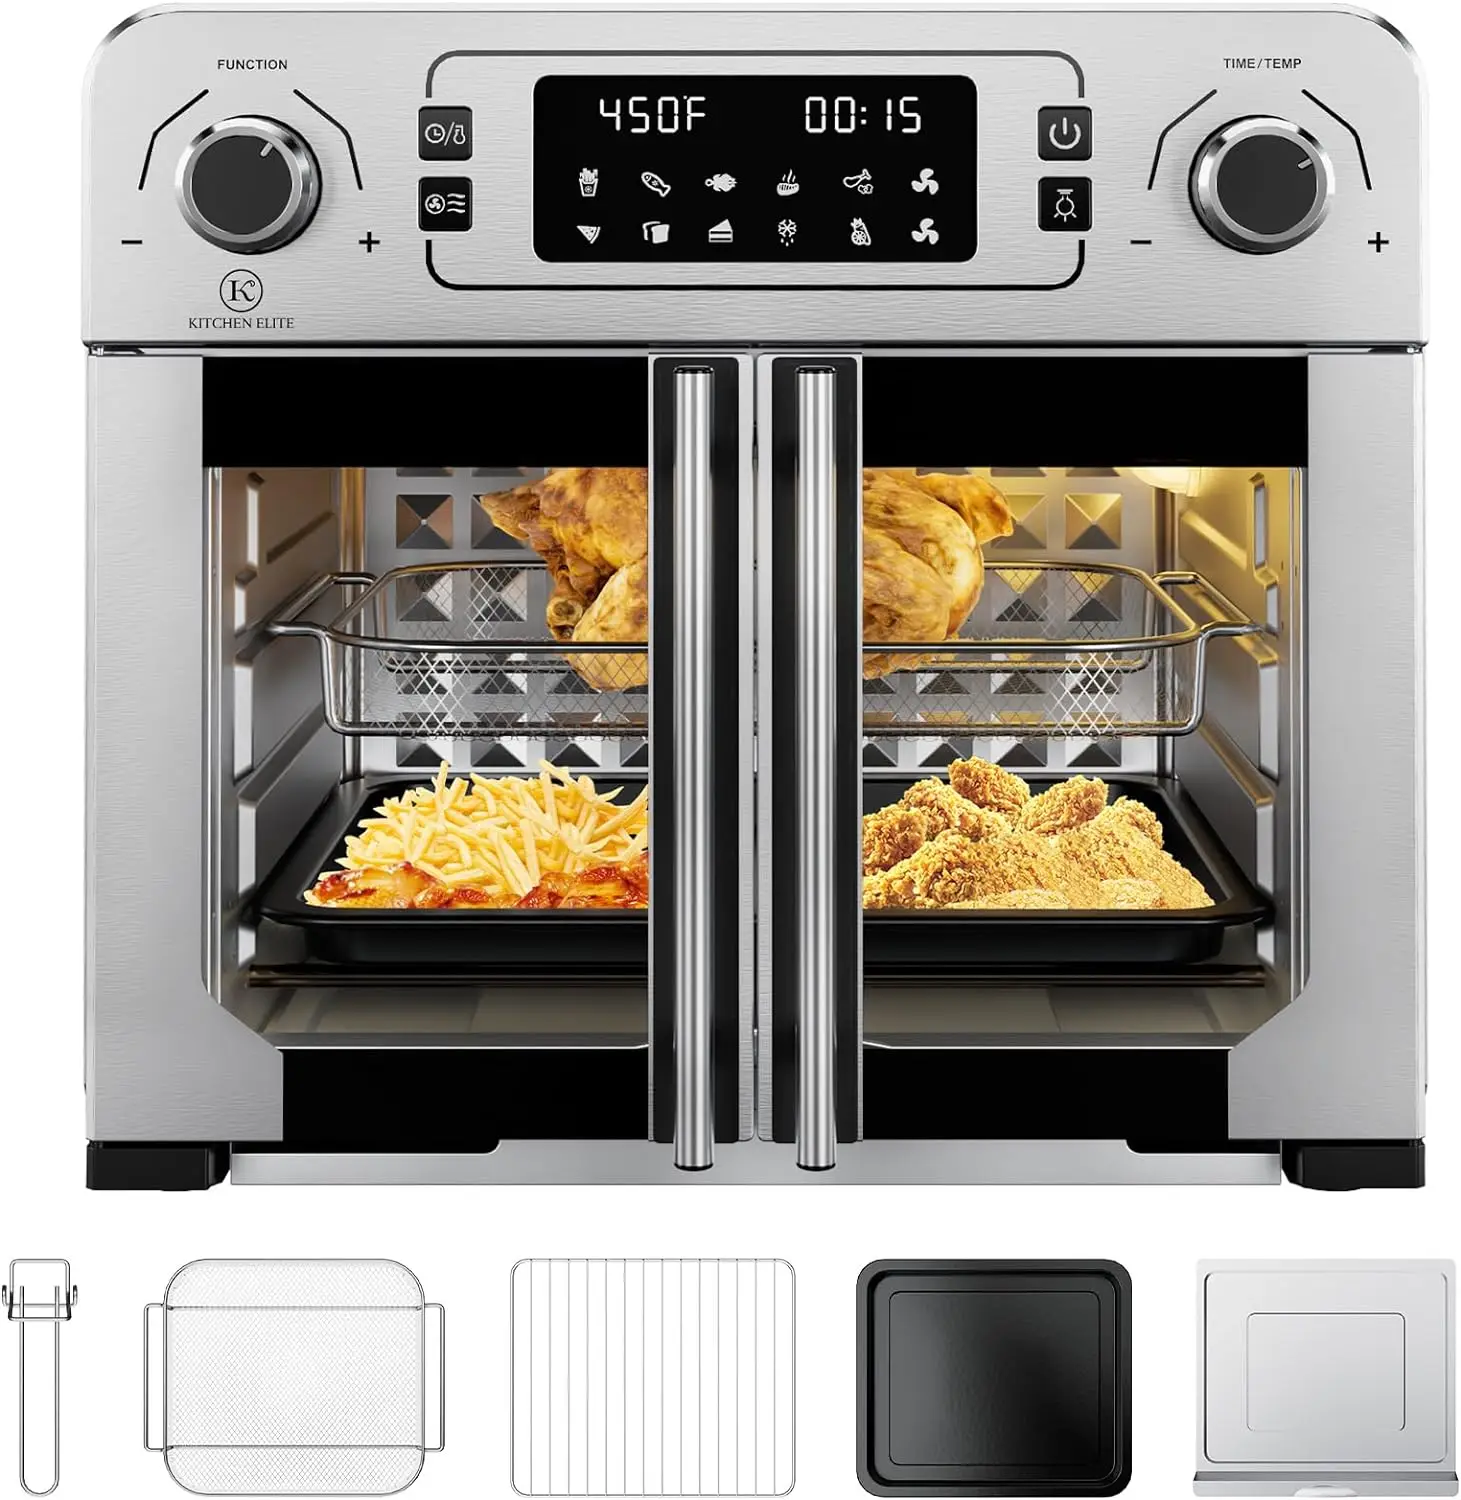 

Kitchen Toaster Oven Air Fryer Combo,10-in-1,10 Touch Screen Presets,25QT Large Countertop Oven,Stainless Steel French Door,5 A